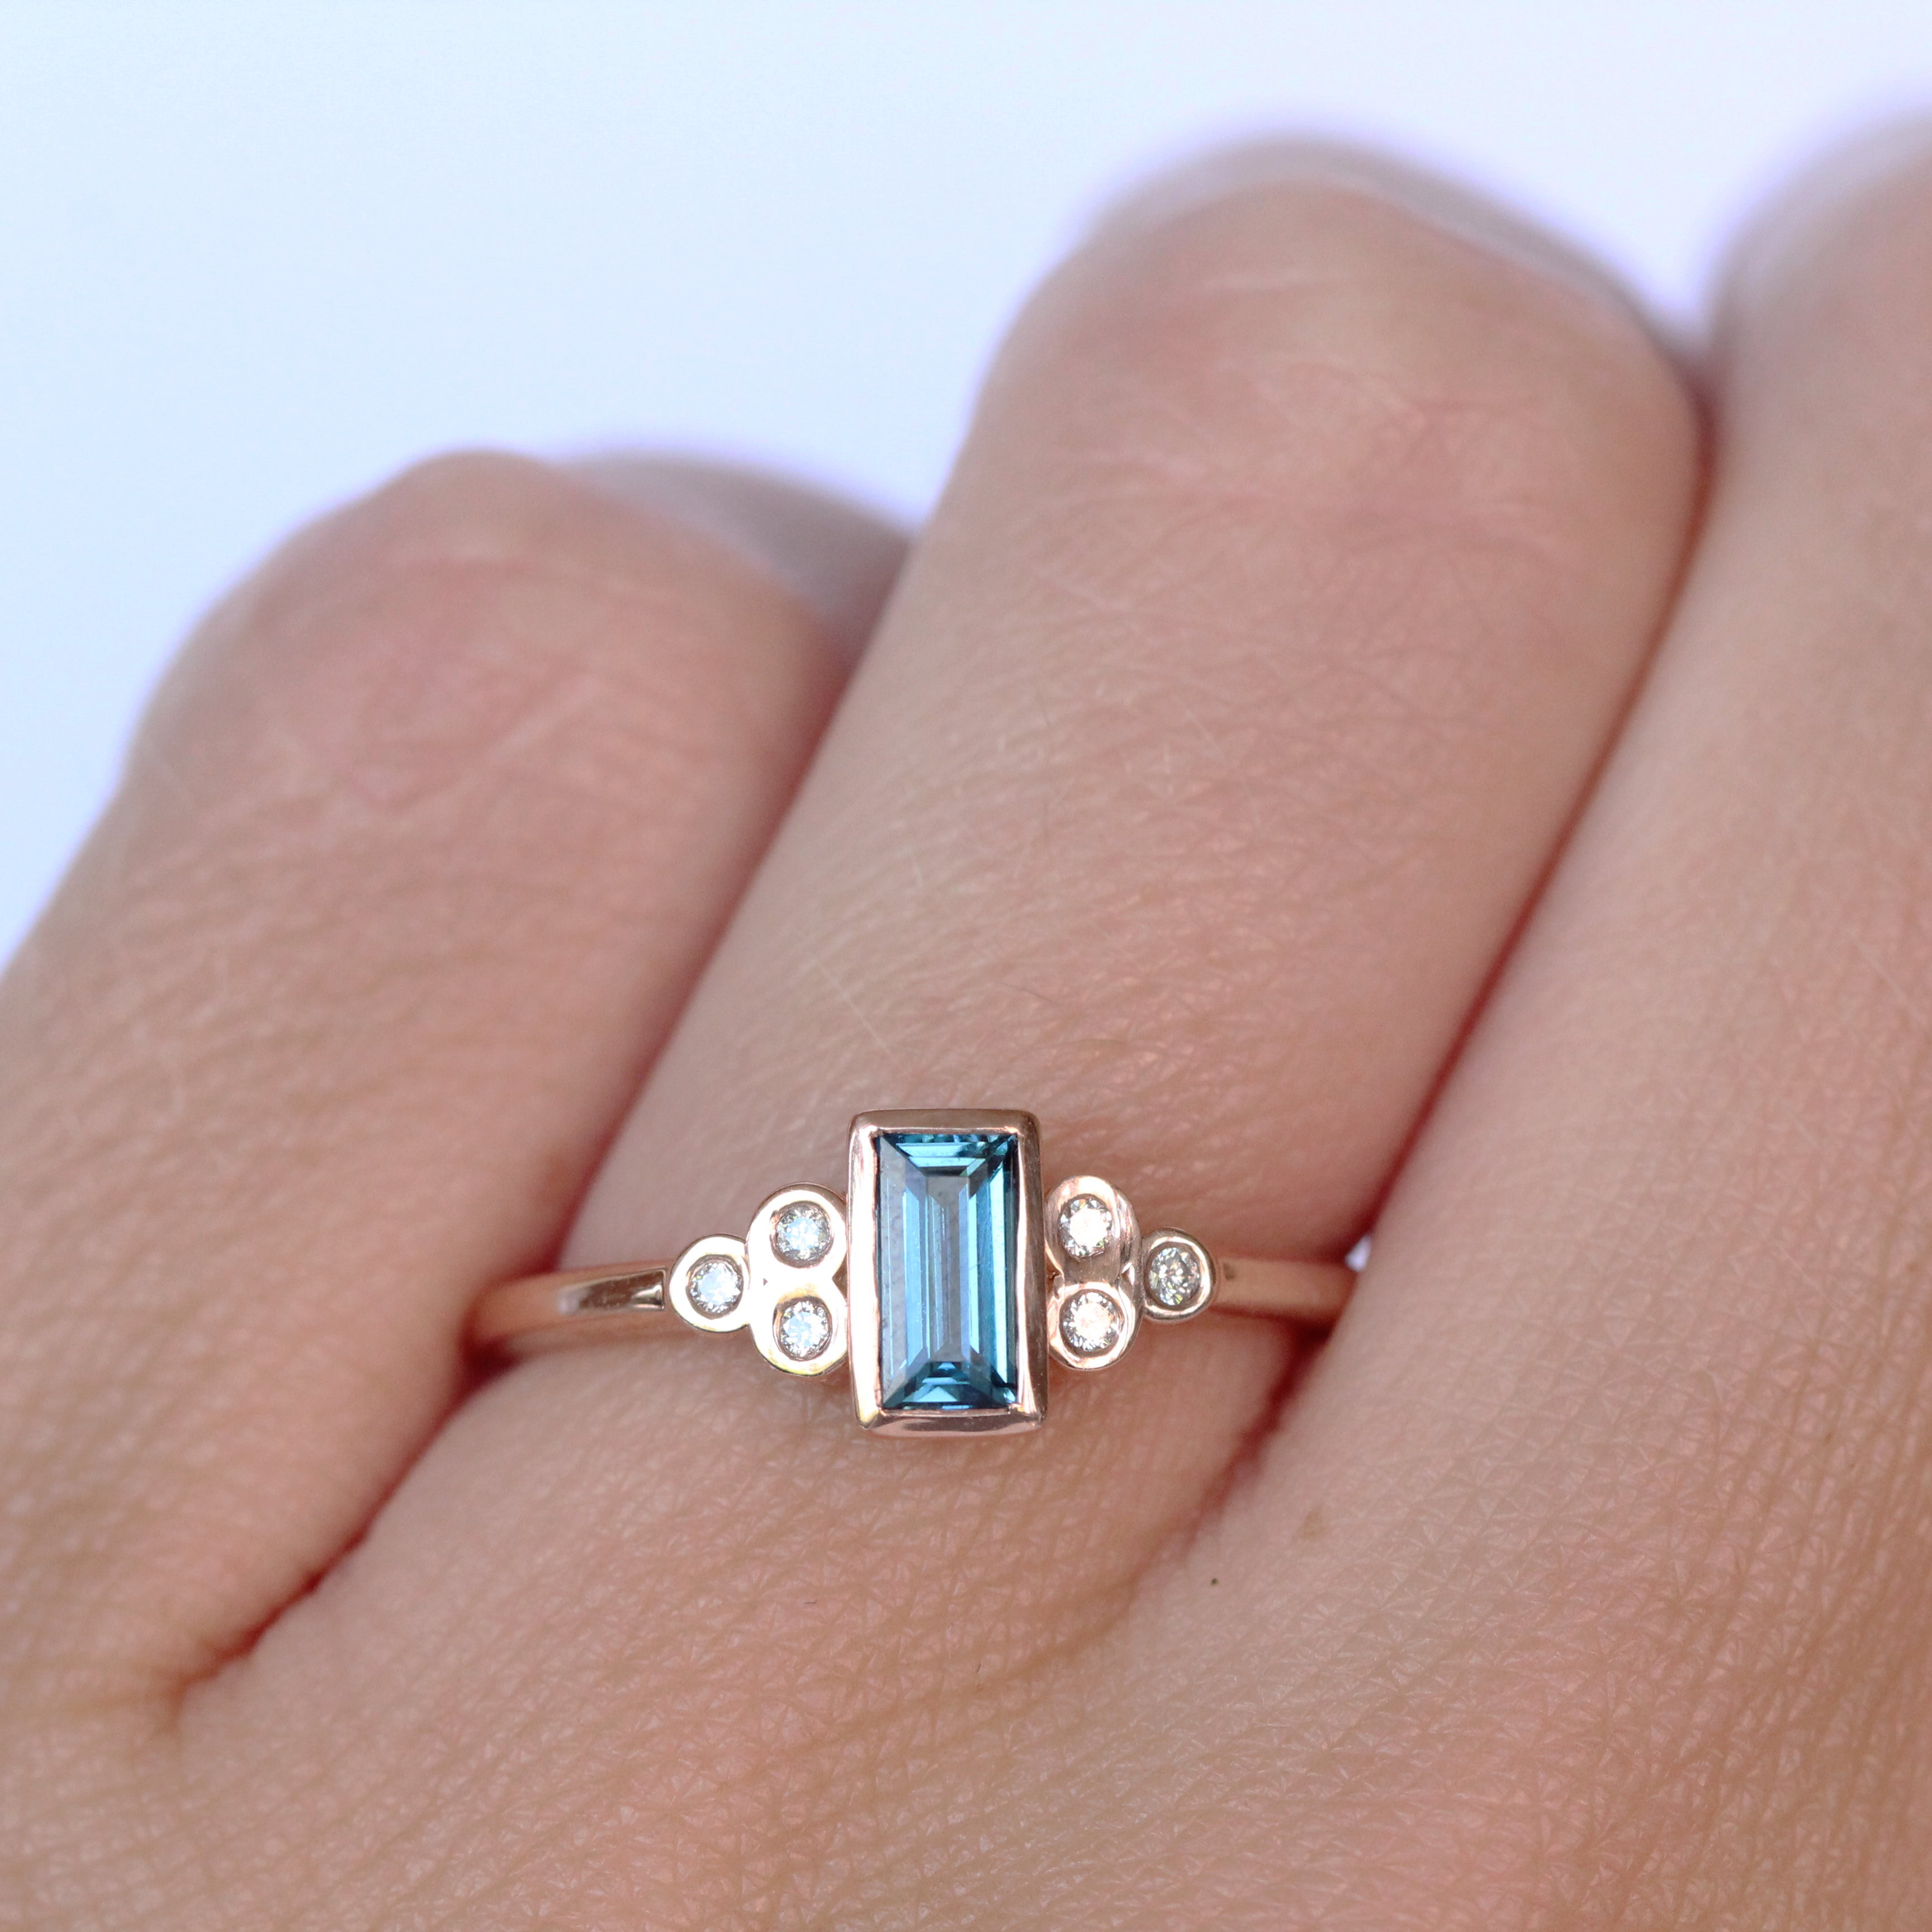 UbyKate - Did you score yourself one of our Limited Edition London Blue  Topaz Gemstone Rings today ???⁣⠀ ⁣⠀ I finally managed to nab one for myself  last week as they have